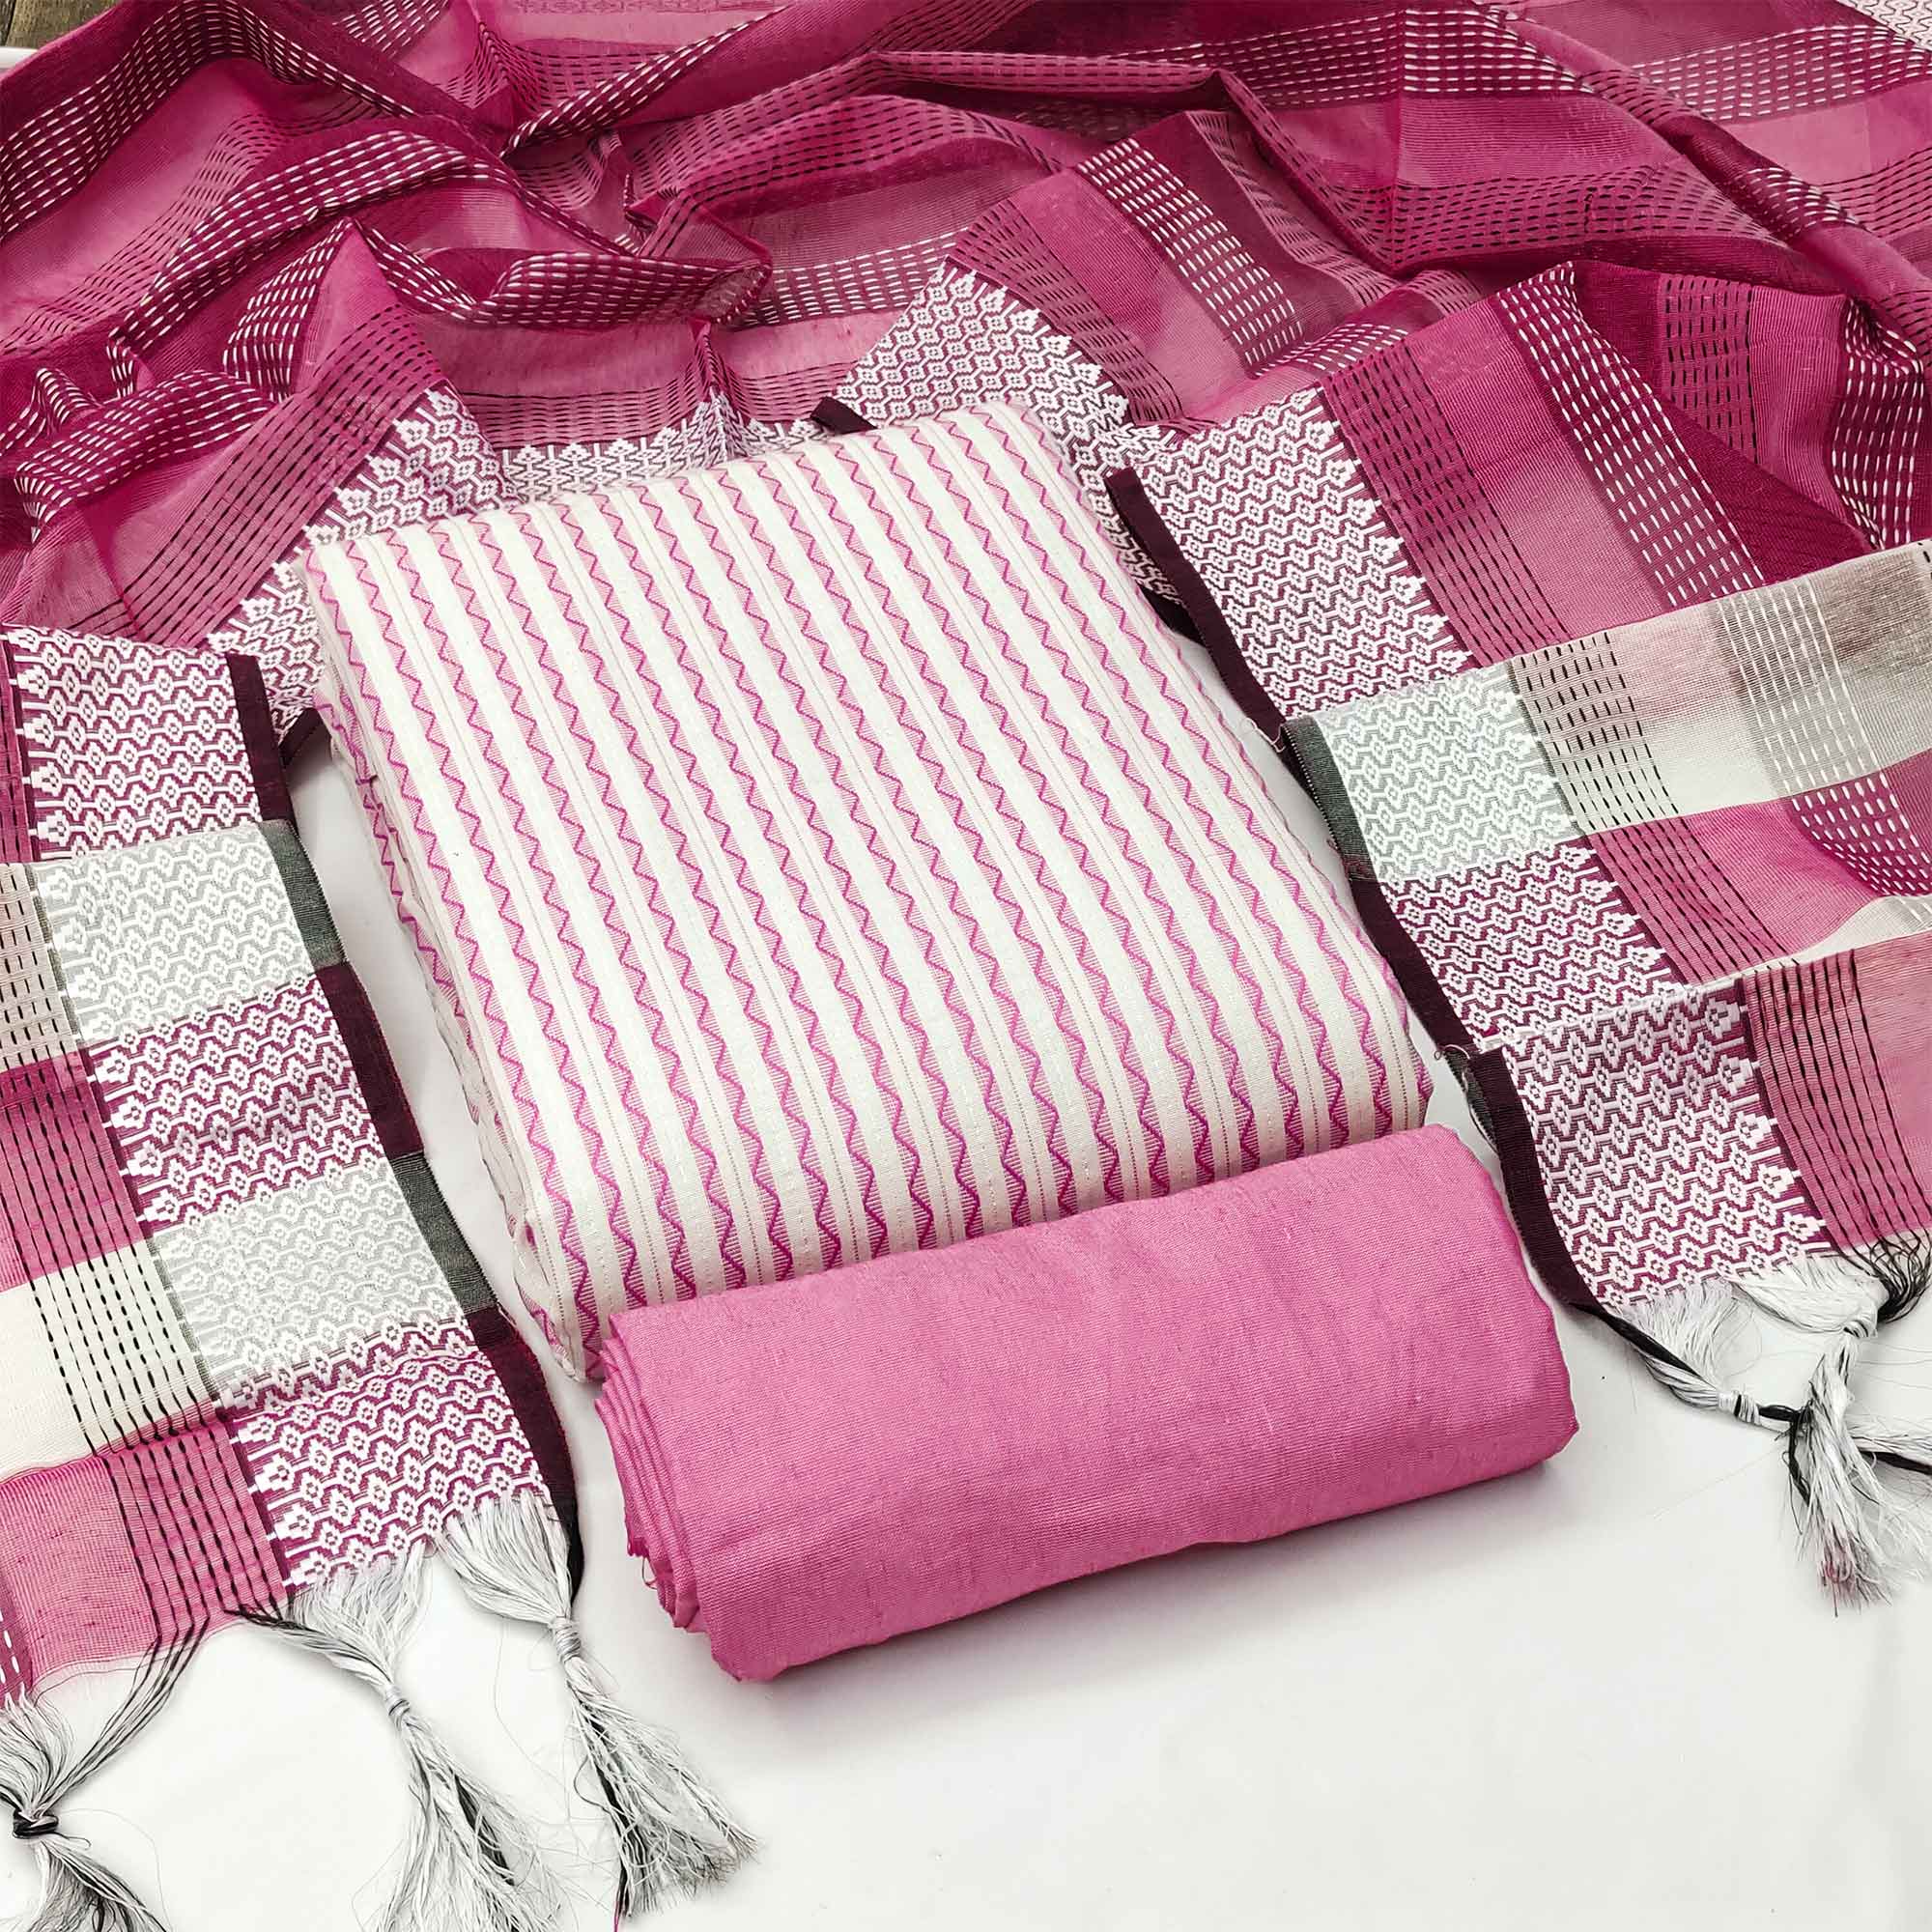 Pink Striped Printed With Woven Cotton Blend Dress Material